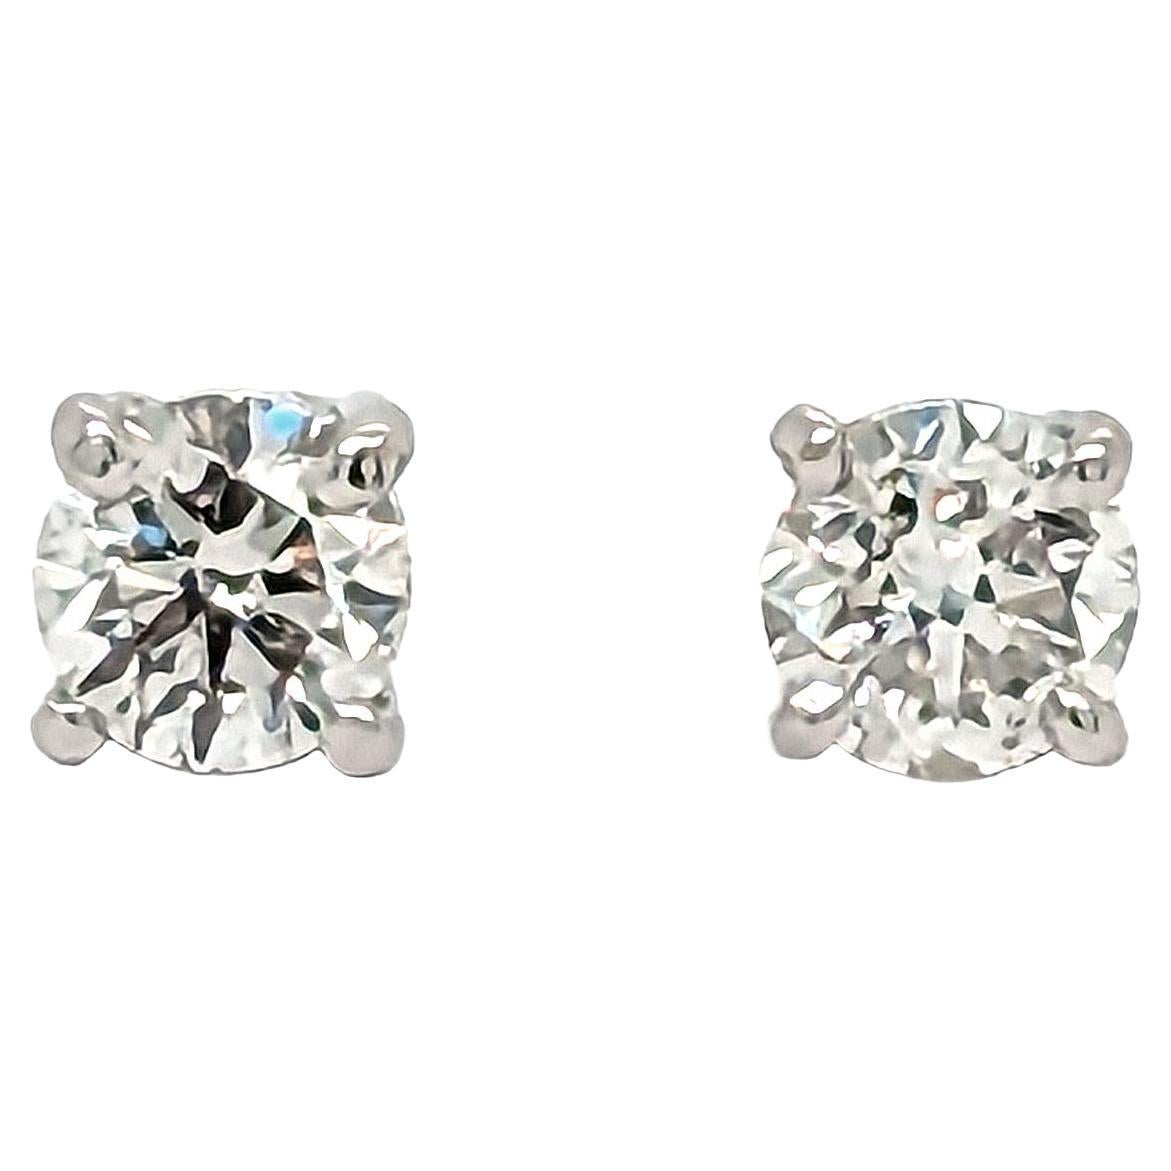 Modern Diamond And White Gold Stud Earrings, 0.52 Carats For Sale